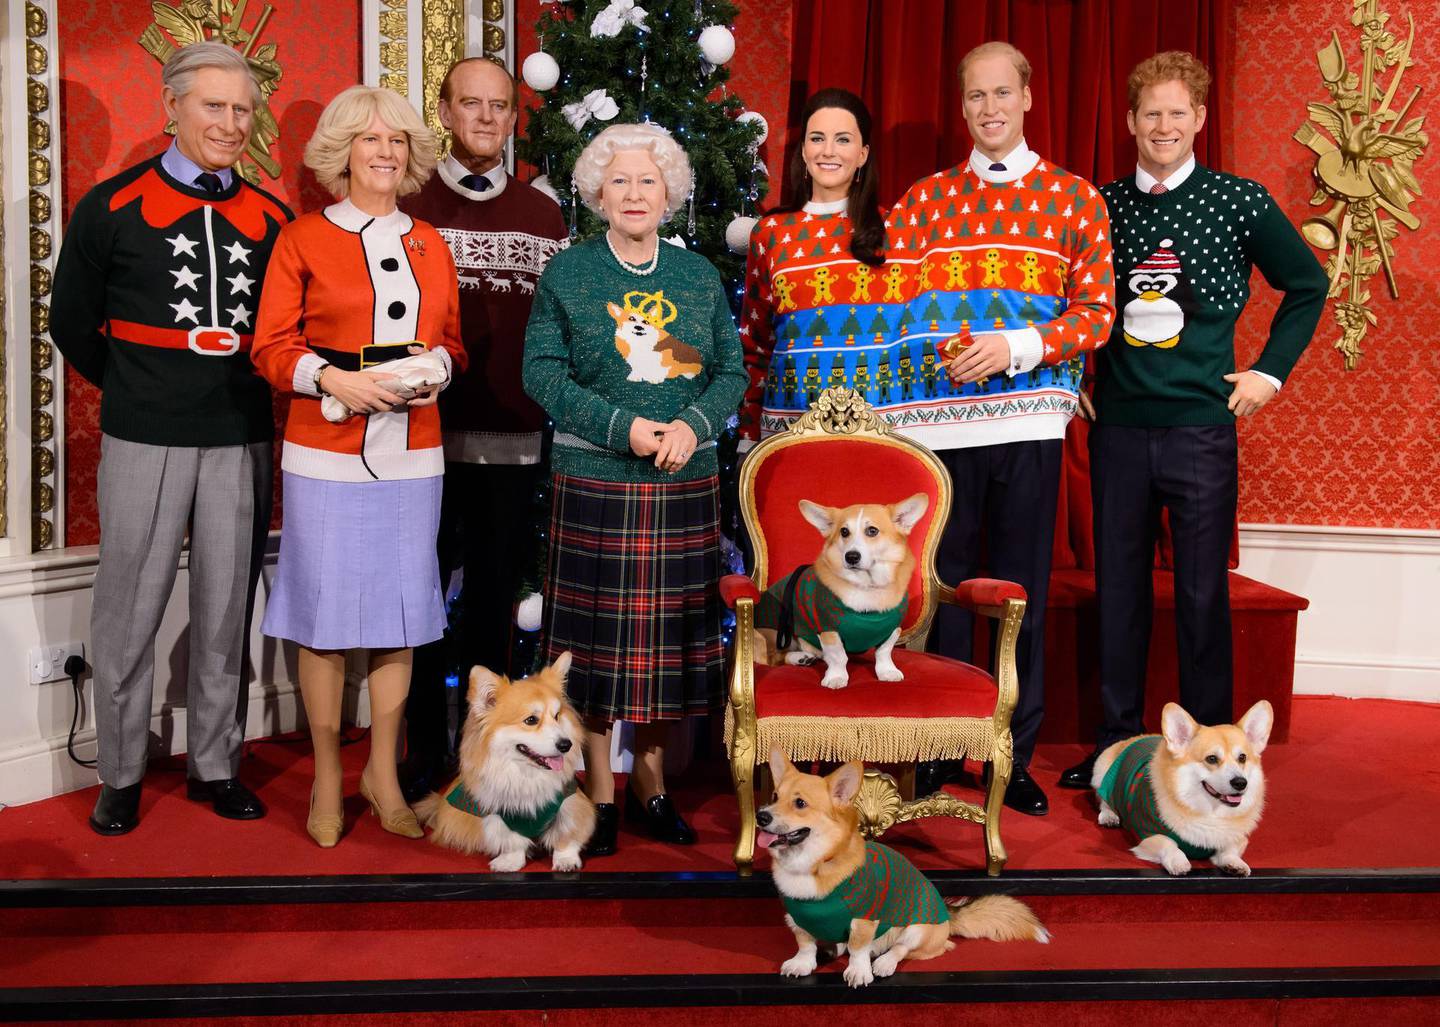 Mandatory Credit: Photo by Jonathan Hordle/Shutterstock (7547098m)The Queen's favourite companions, four real corgis, don their own Christmas jumpers to help Save The Children's Christmas Jumper Day on 16th December.Madame Tussauds London's Royal family don Christmas jumpers to support Save the Children, London, UK - 06 Dec 2016